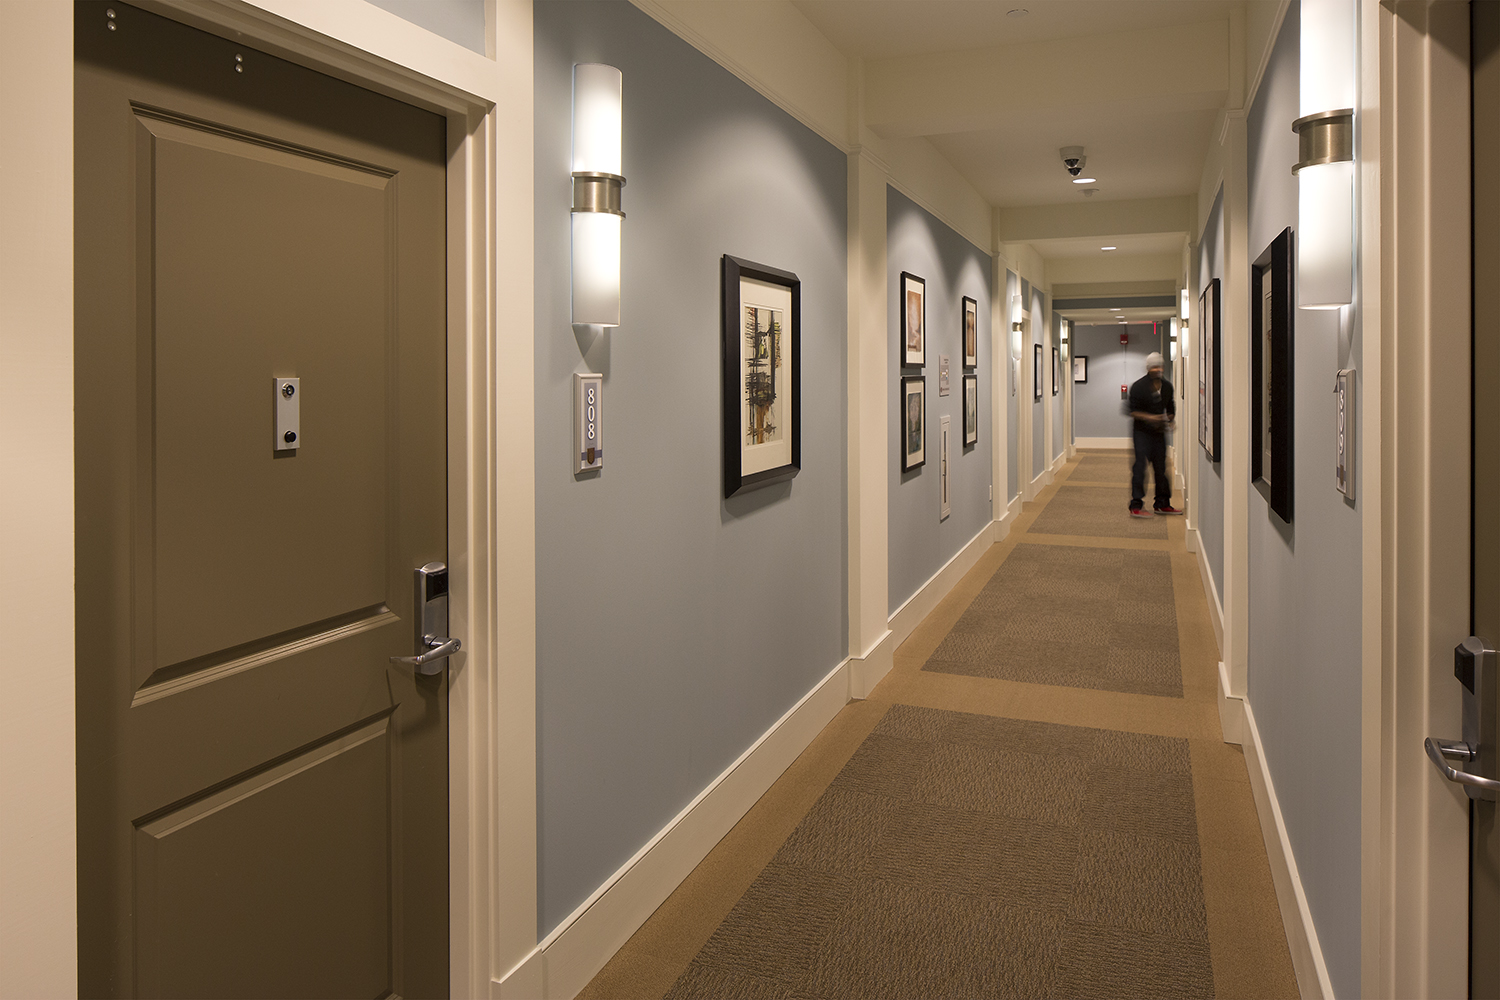 Pila sconces are ideal for hotel or apartment lighting applications, seen here alongside doors in a residential hallway.